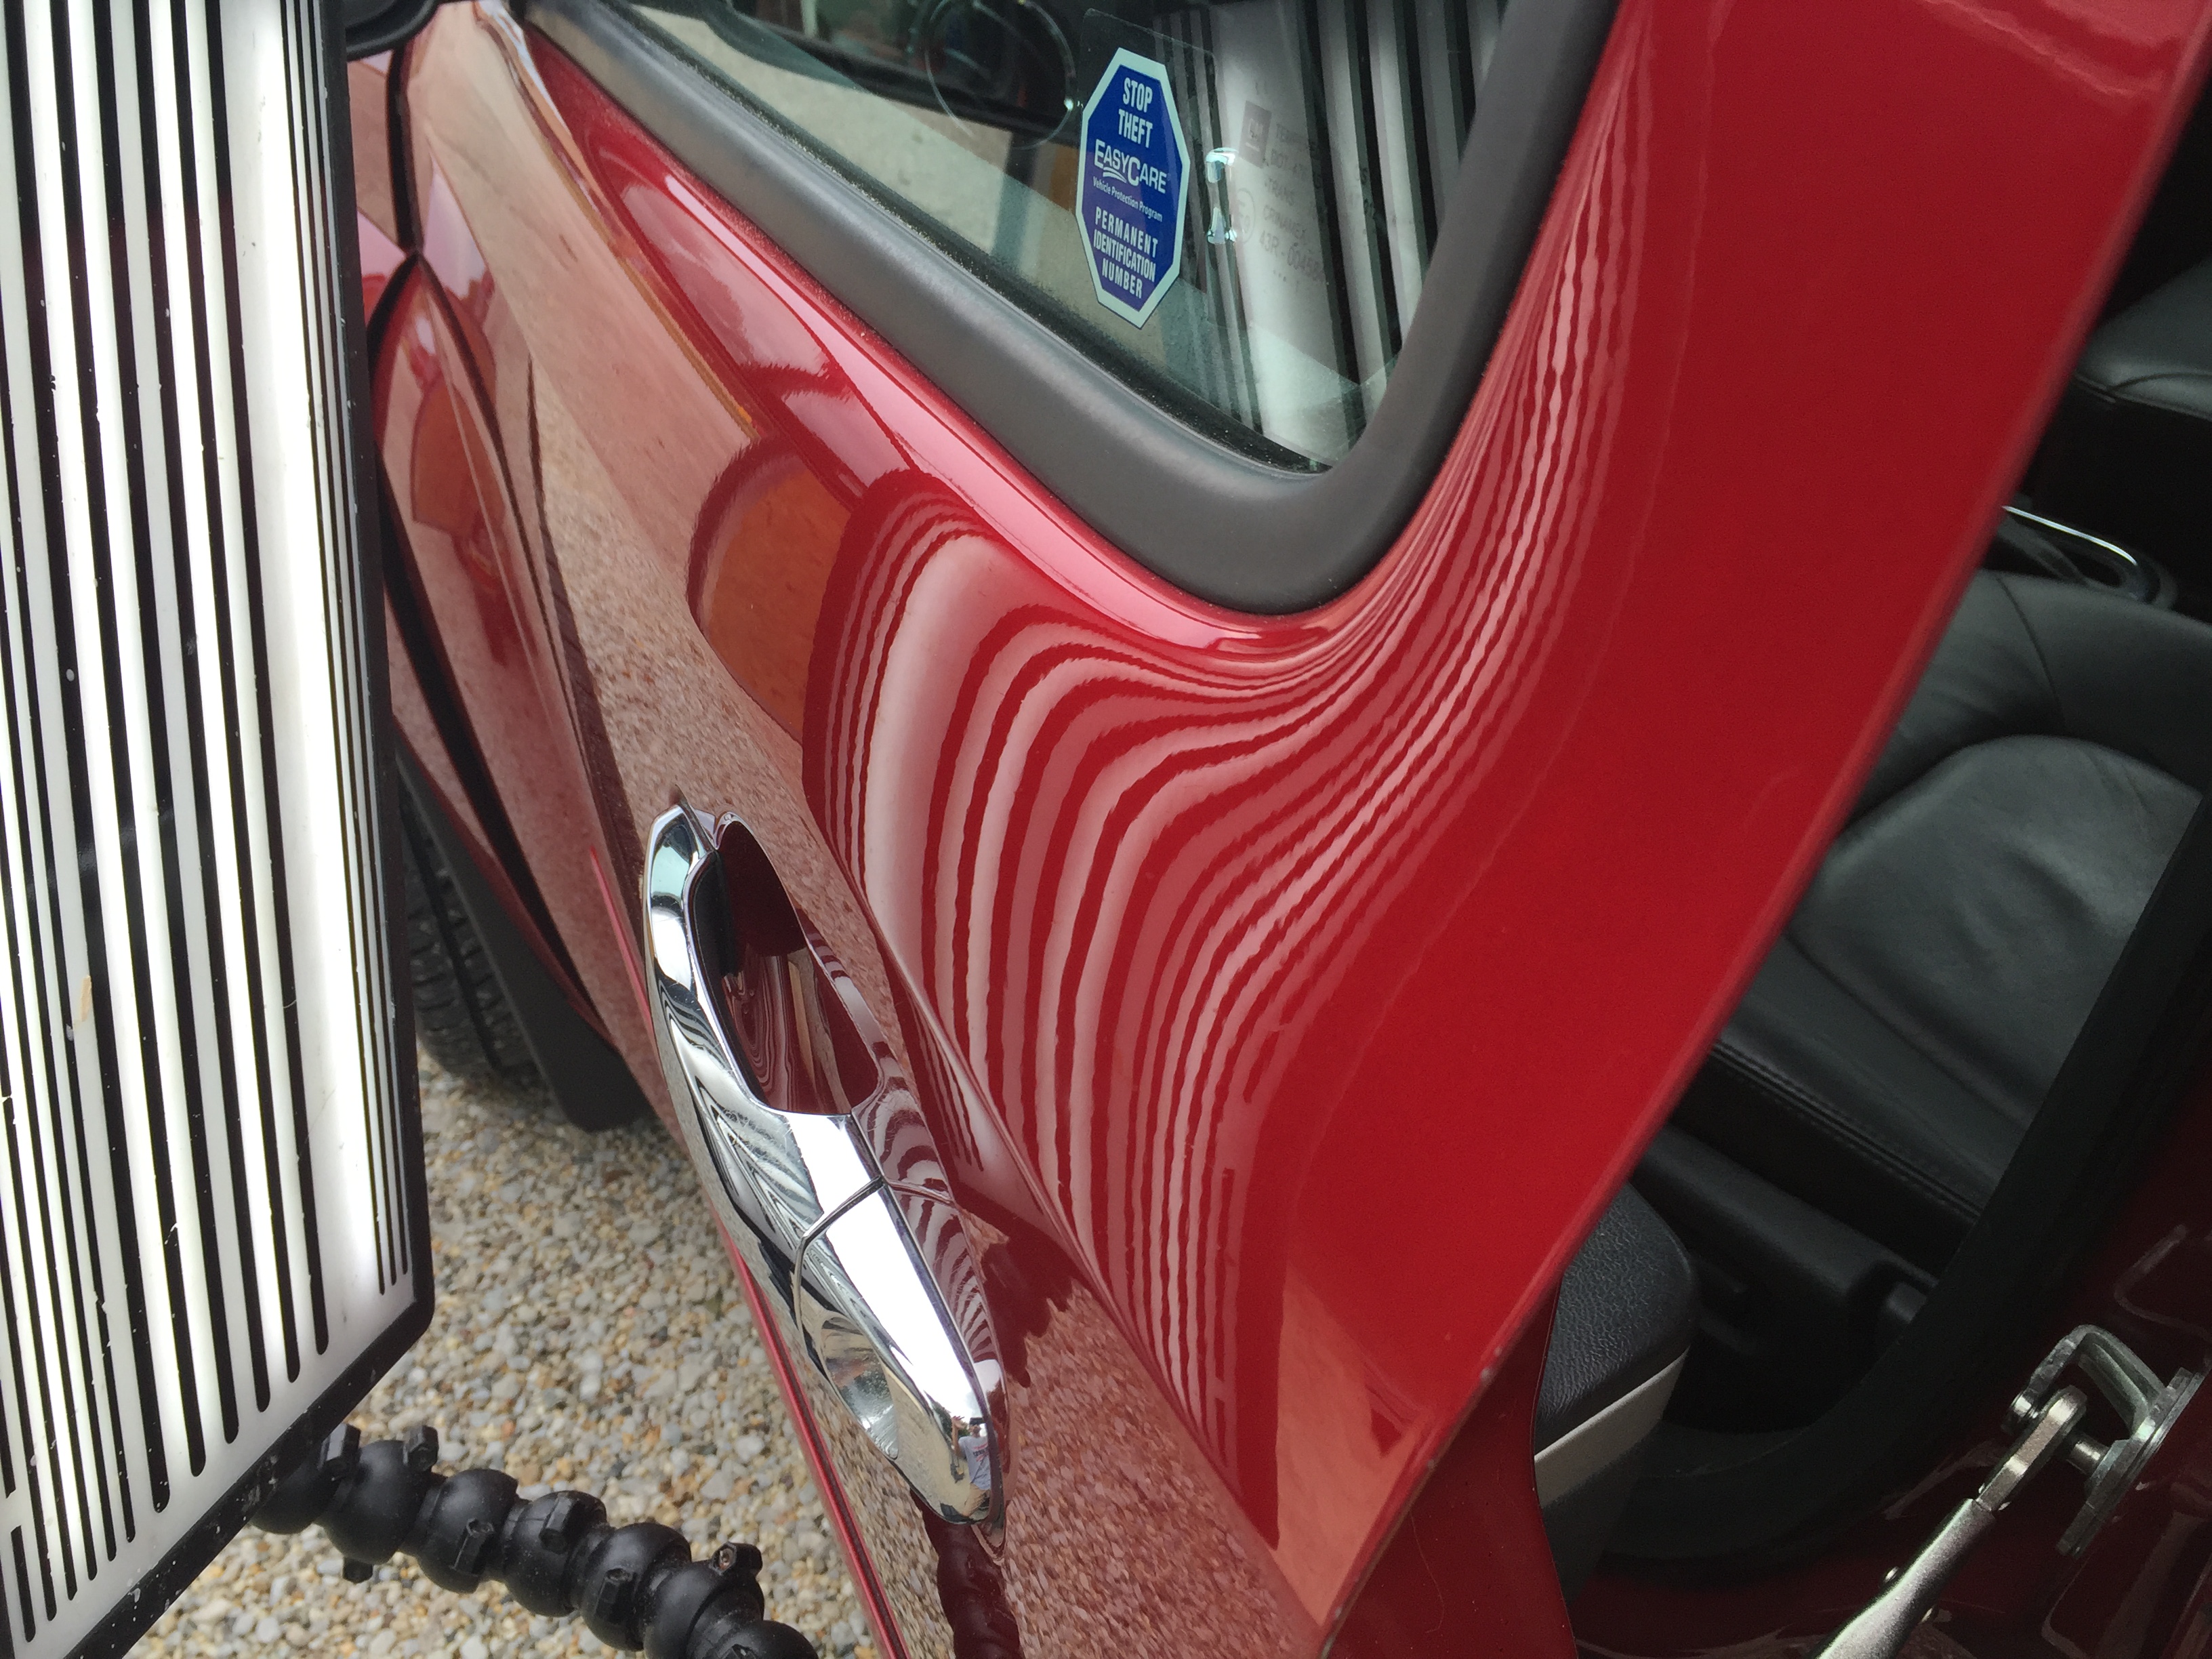 2011 Chevy HHR, Dent Removal, Pana, IL. Sharp dent in drivers door, http://217dent.com